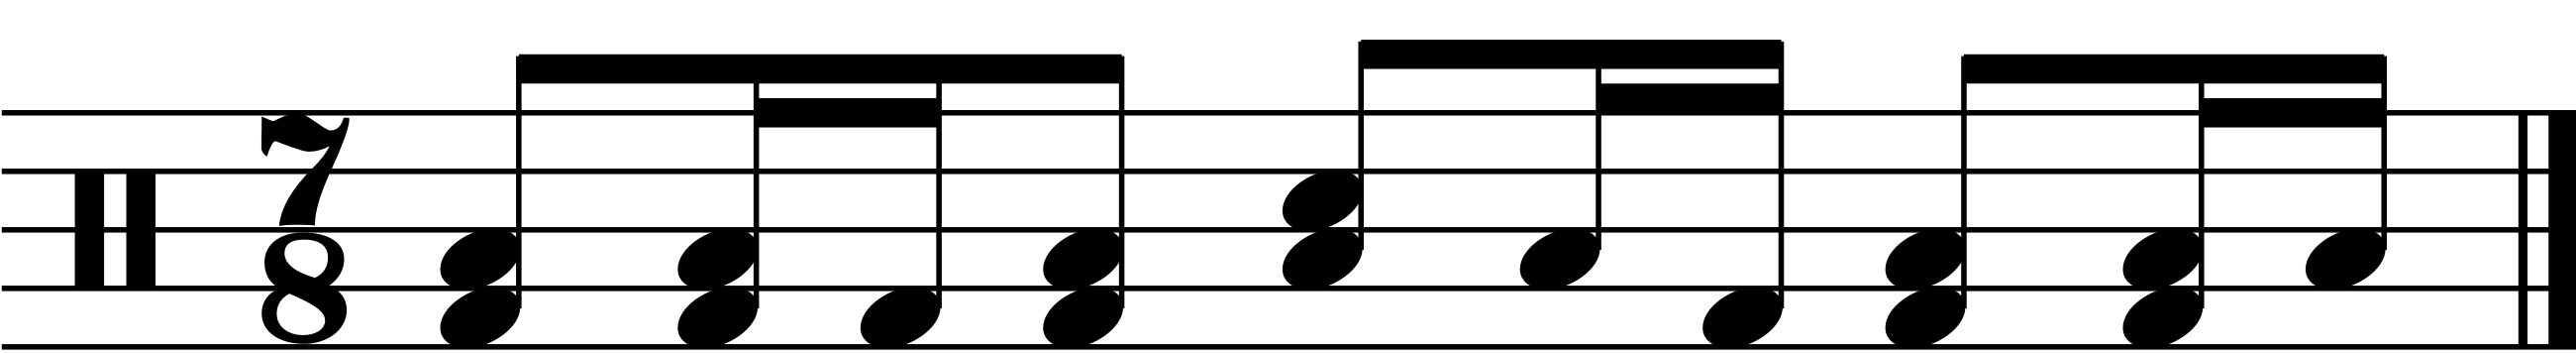 Decorating a 7/8 groove with 16th notes in the right hand